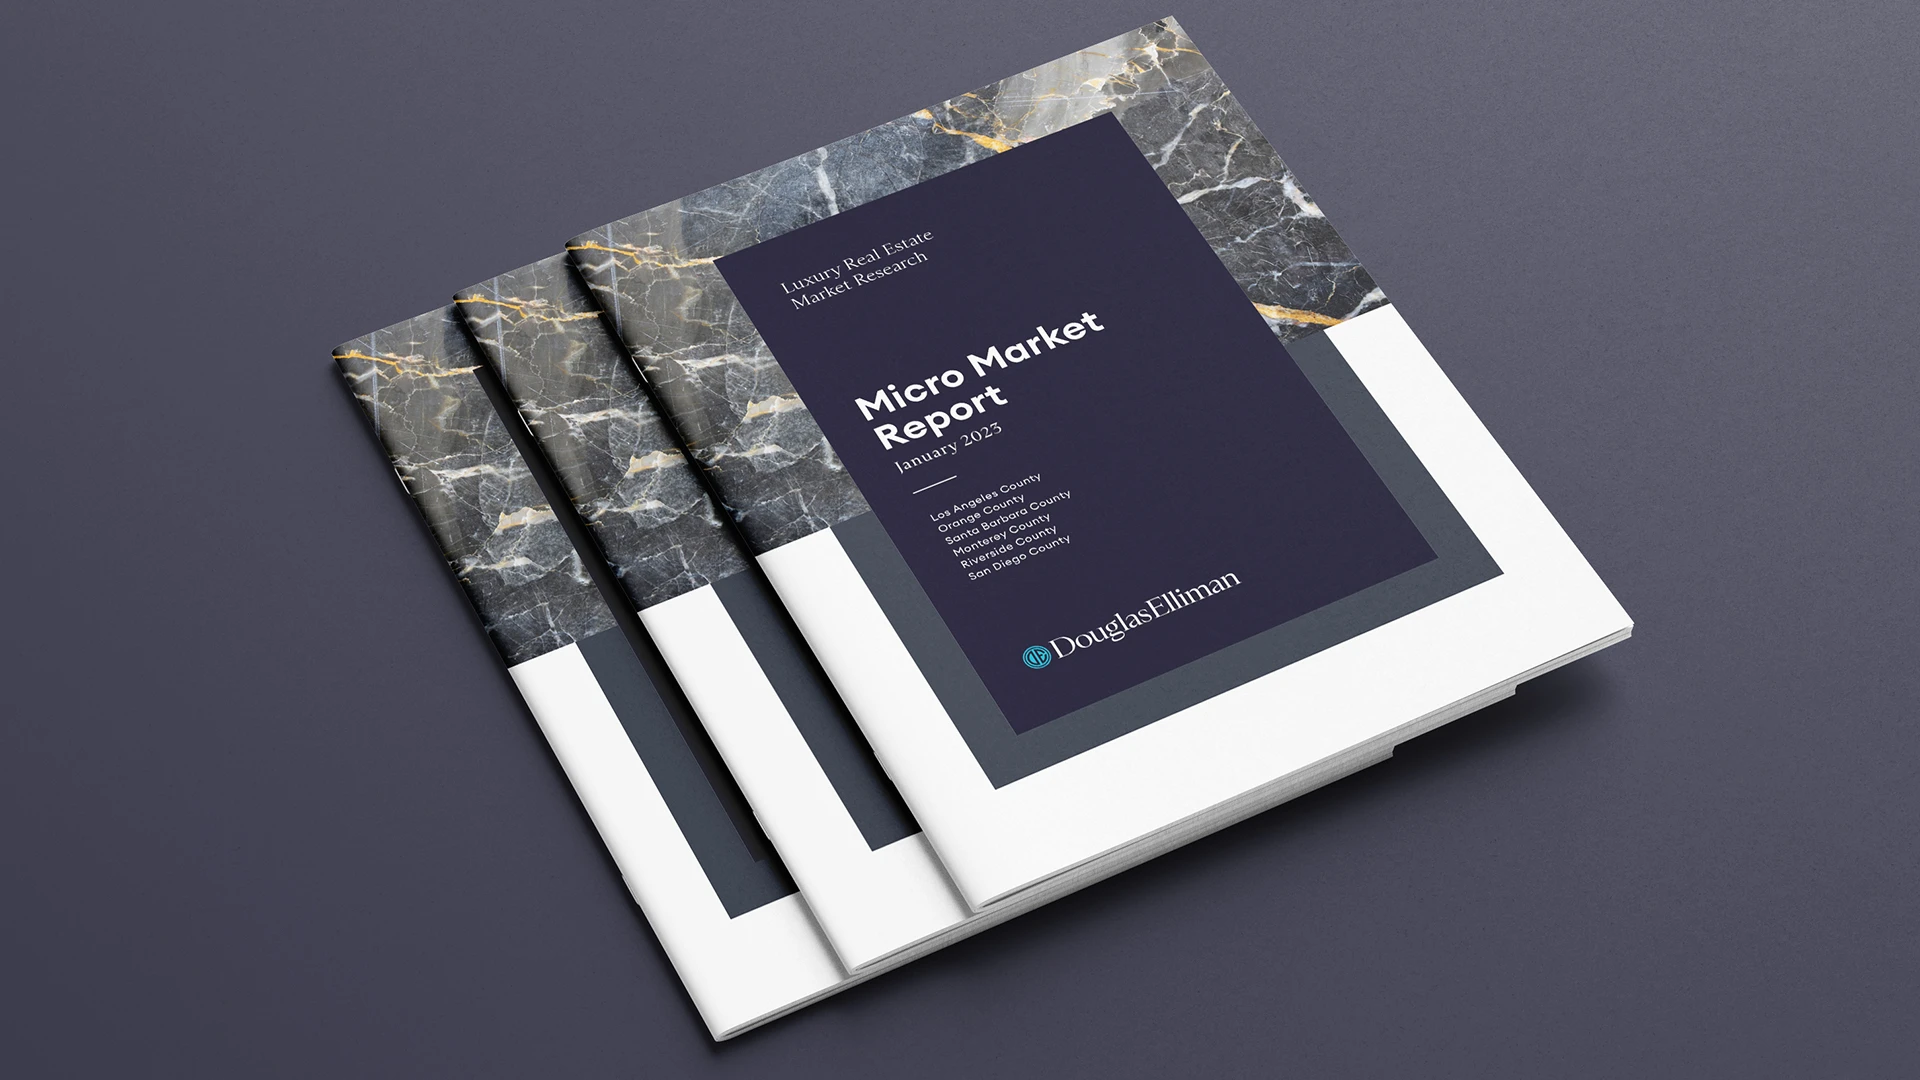 A mockup of three Micro Market Reports in the design iteration that existed from 2020 through mid-2023. This image shows the cover which utilizes a grey luxury marble texture highlight.